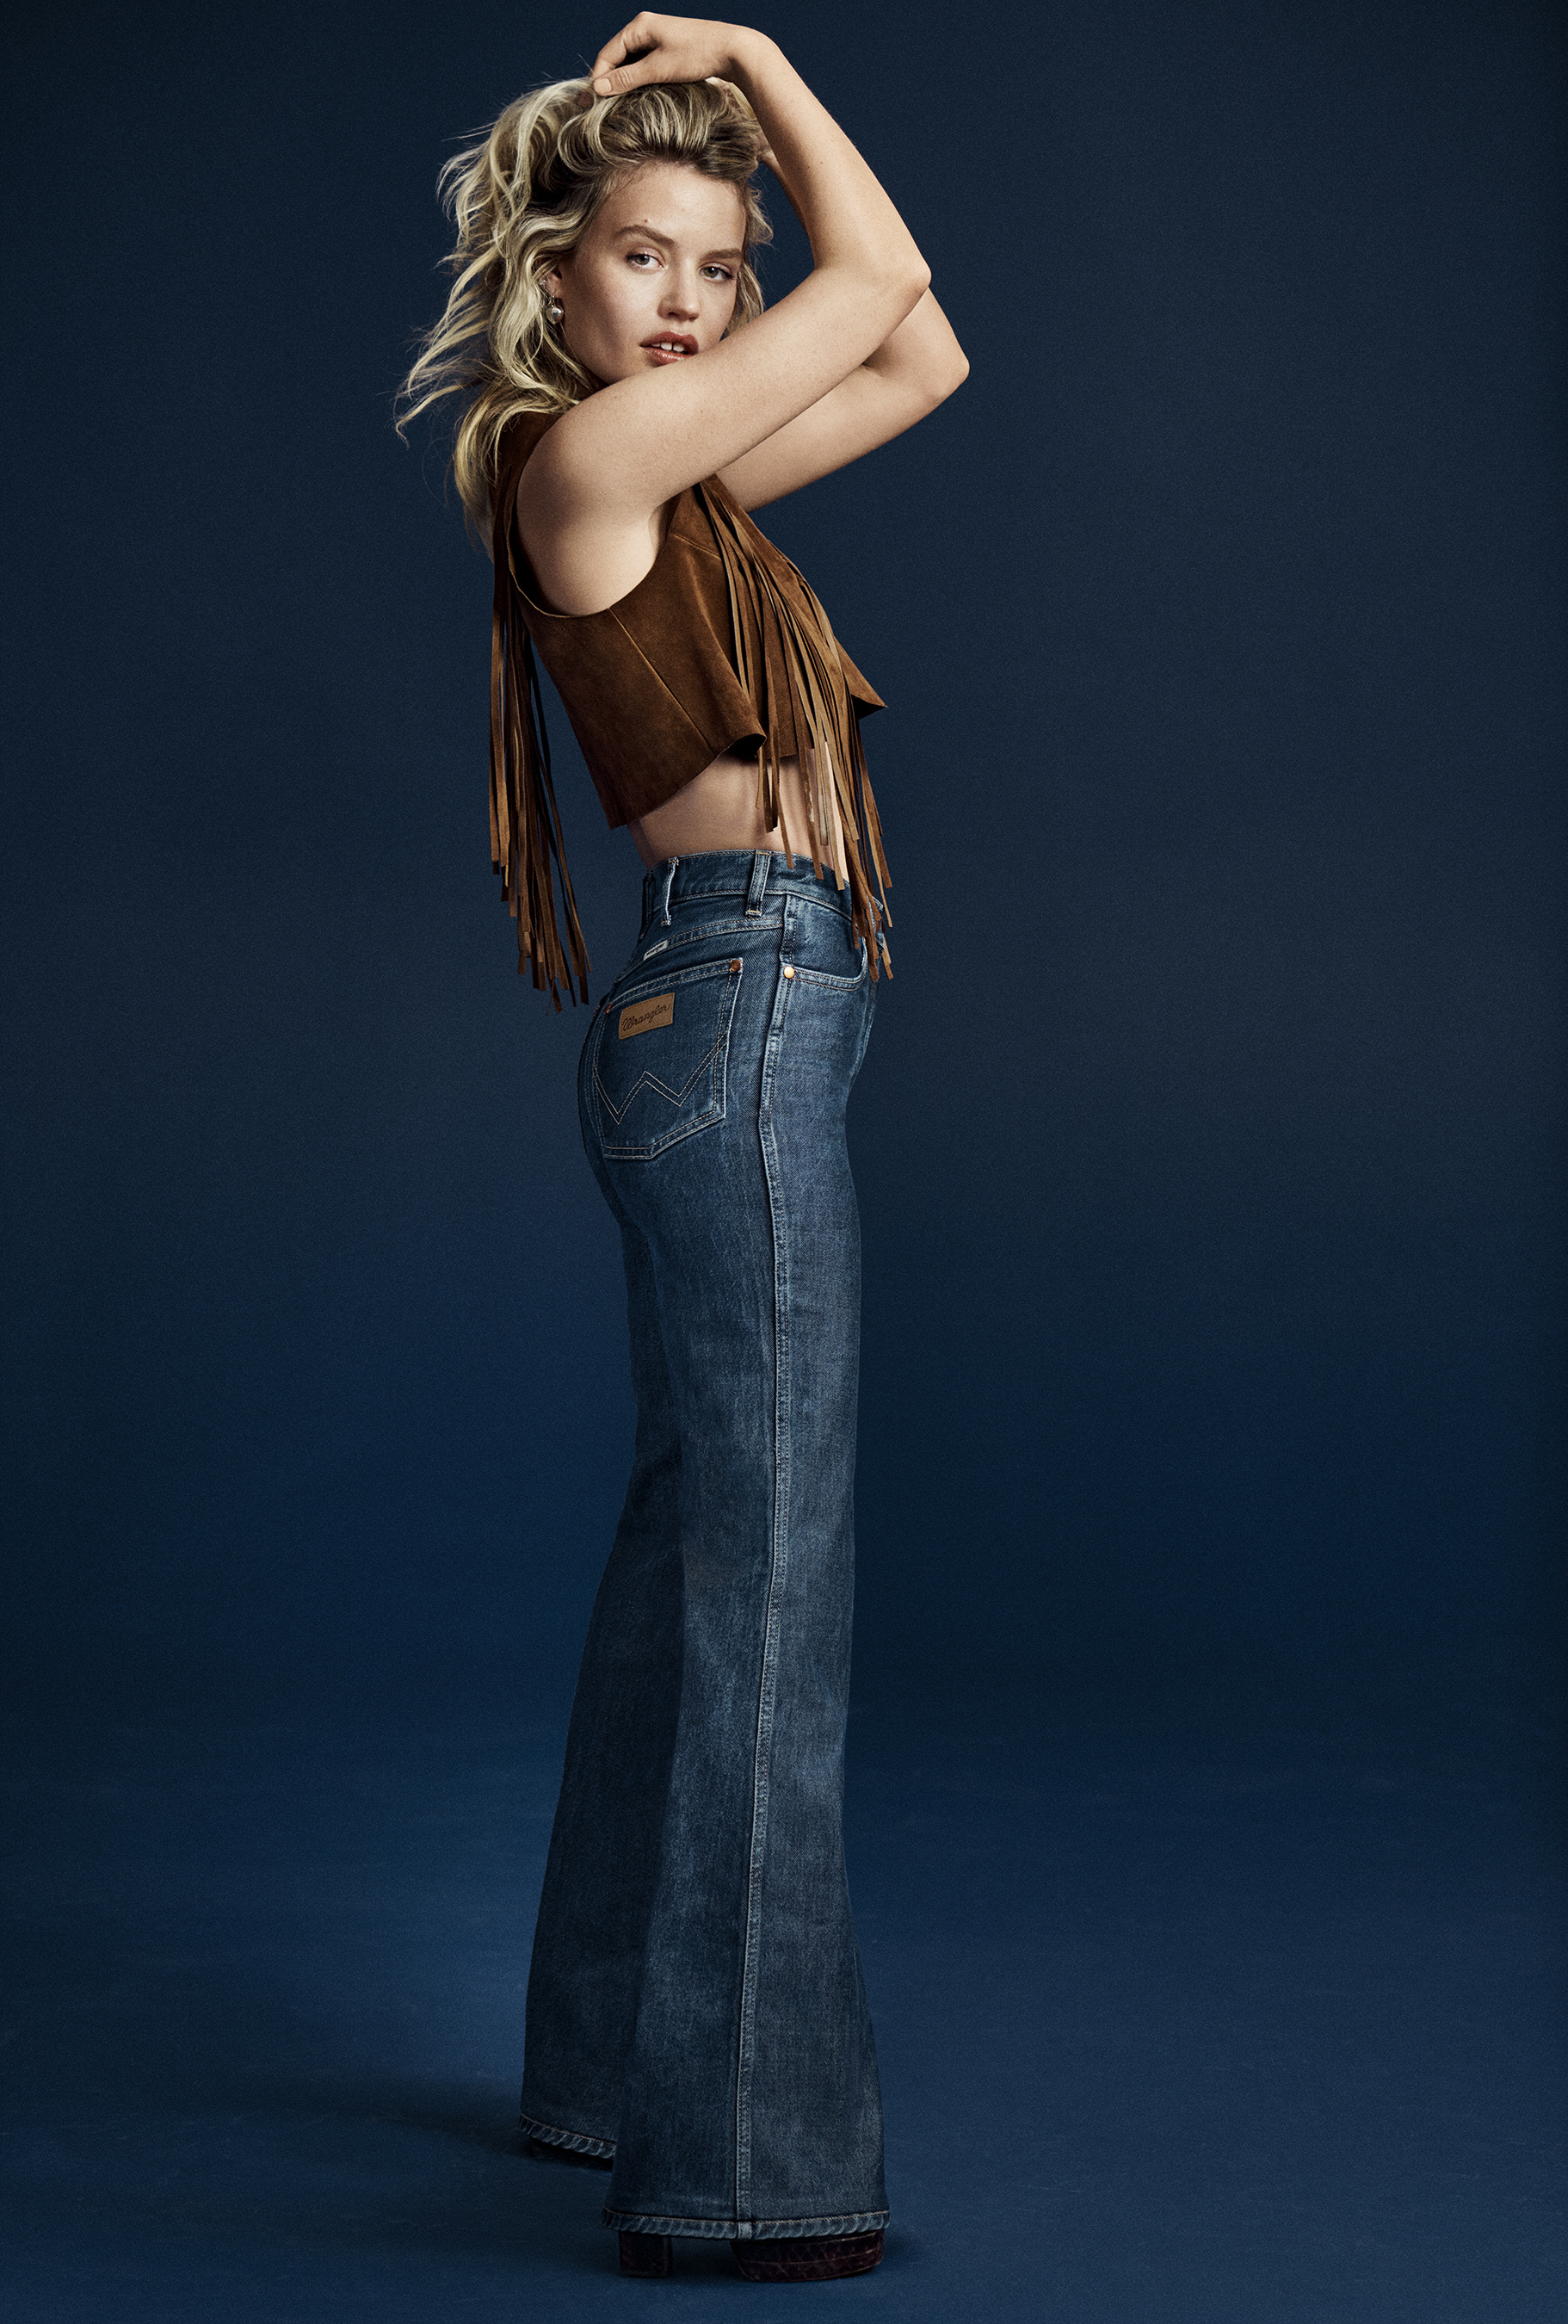 Wrangler names top model as face of Heritage Collection for 'confident,  bold' women 